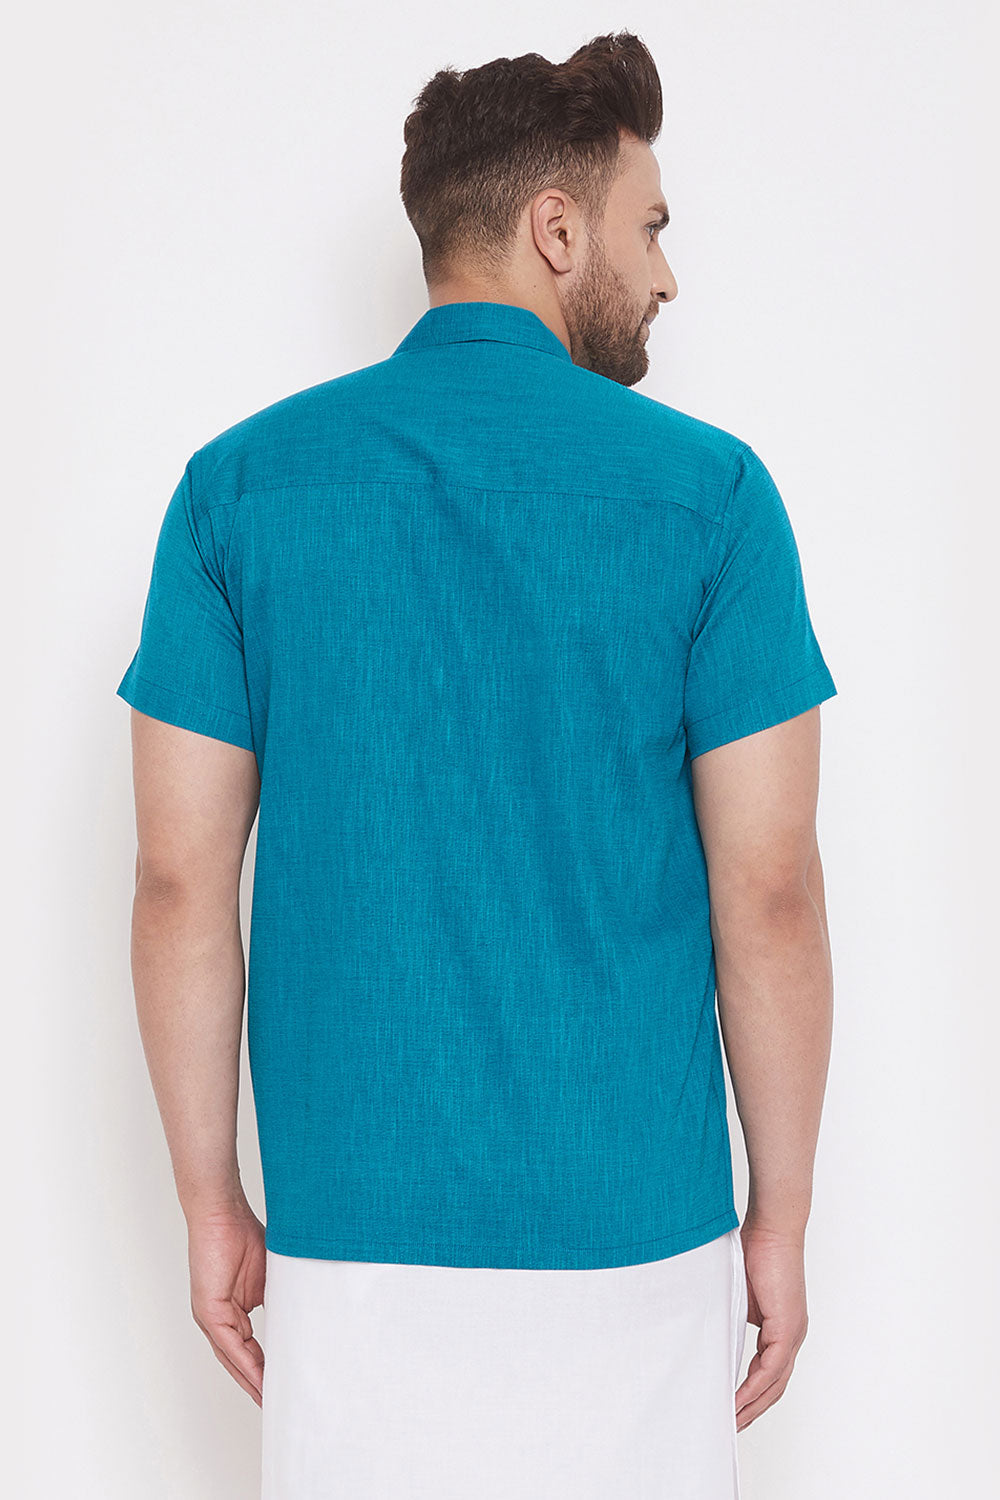 Solid Turquoise Shirt for Casual Wear